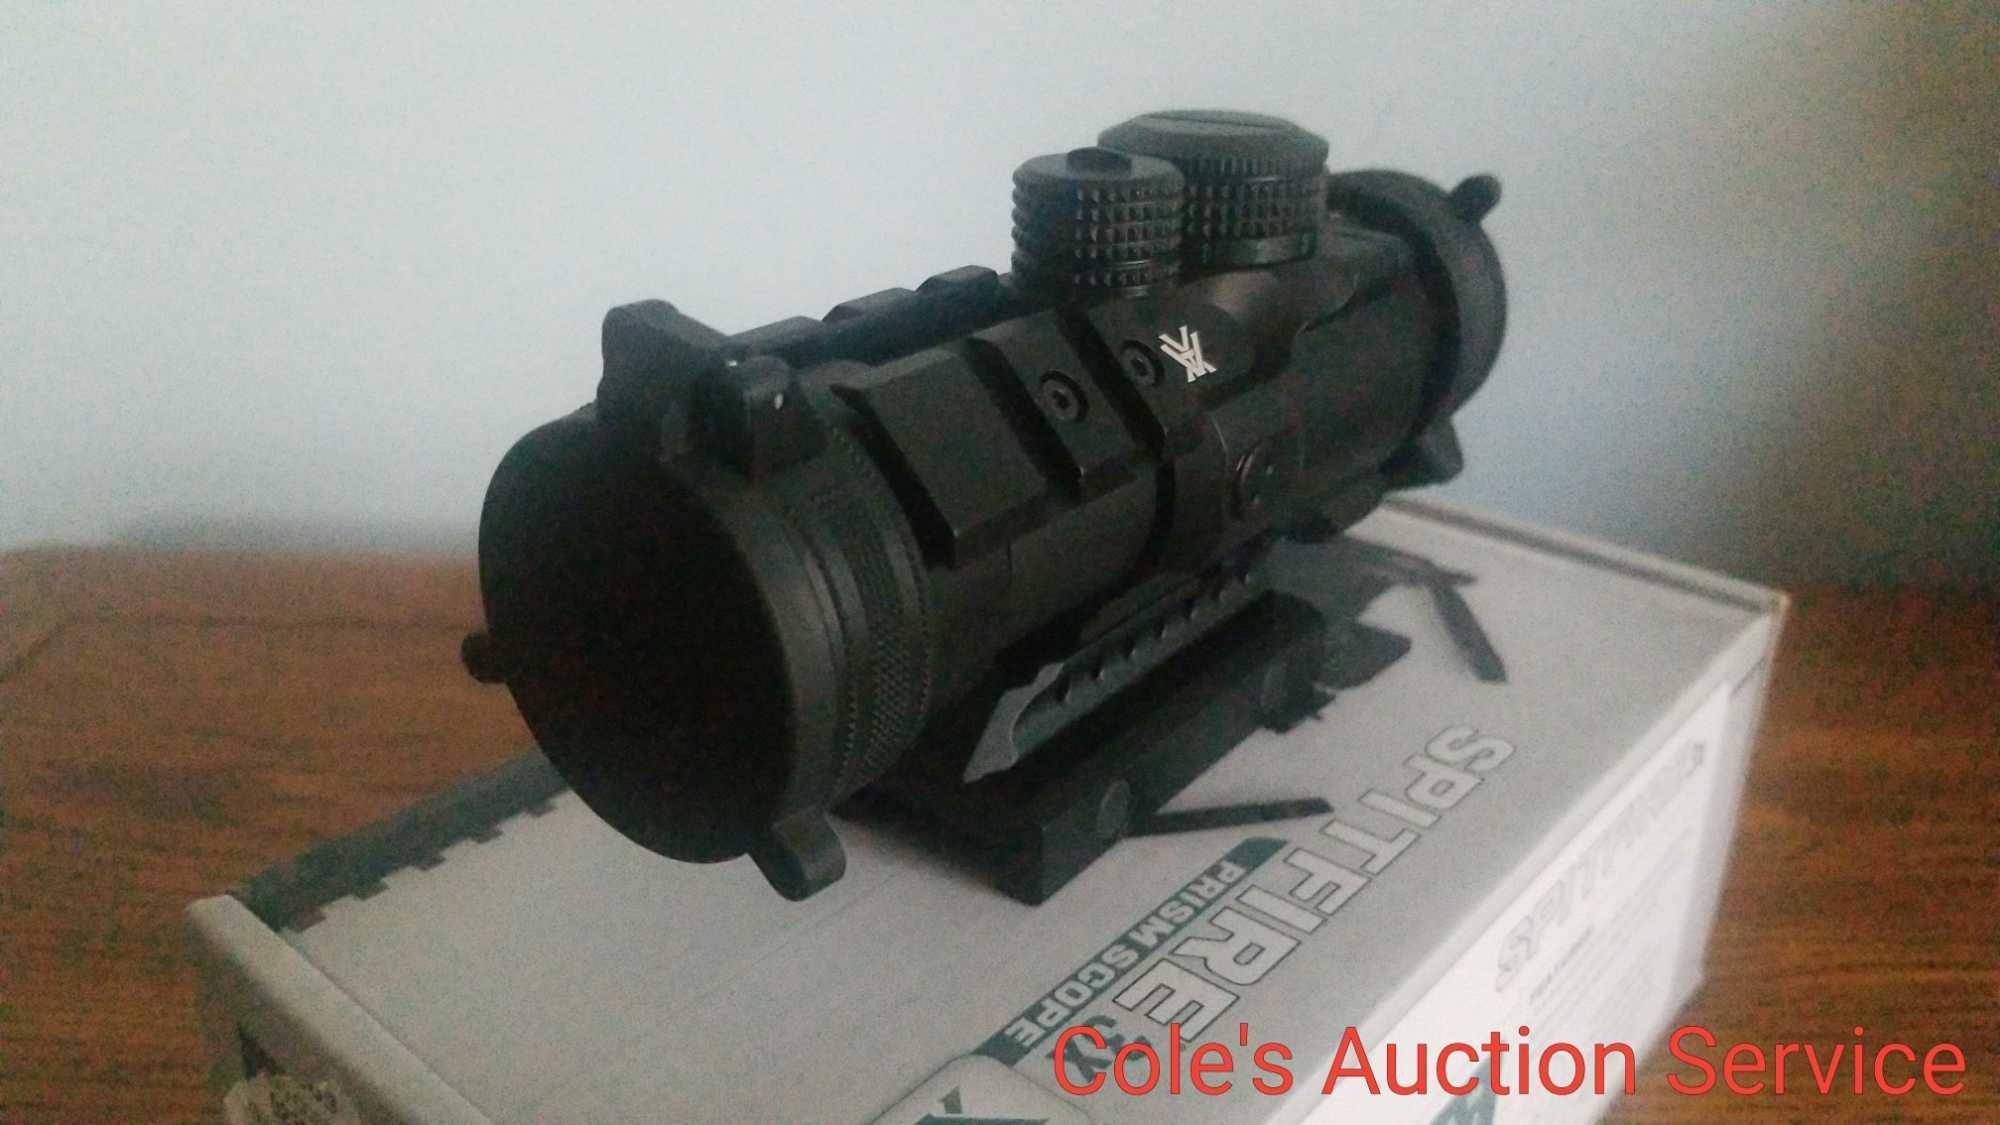 Spitfire 3x prism scope in the box. The perfect choice for the AR platform. Fully coated lens,